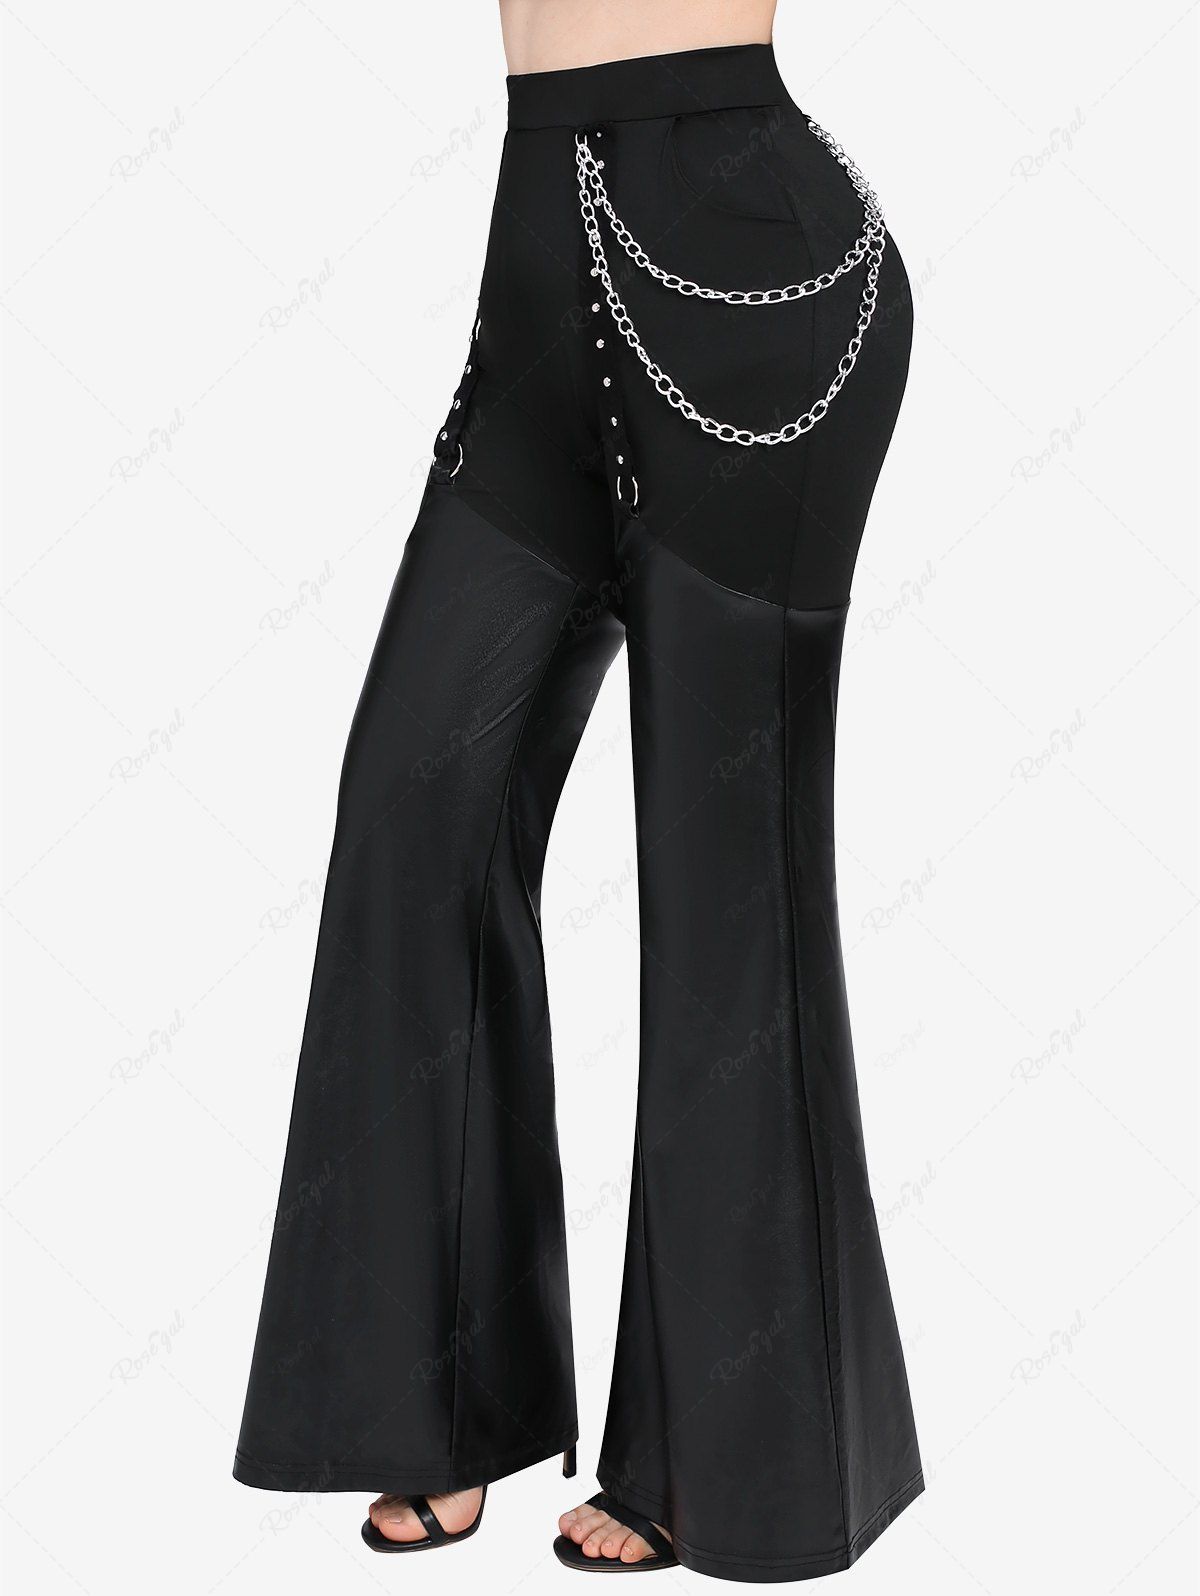 Gothic Chain O-Ring PU Leather Patchwork Grommet Pocket Flare Pants